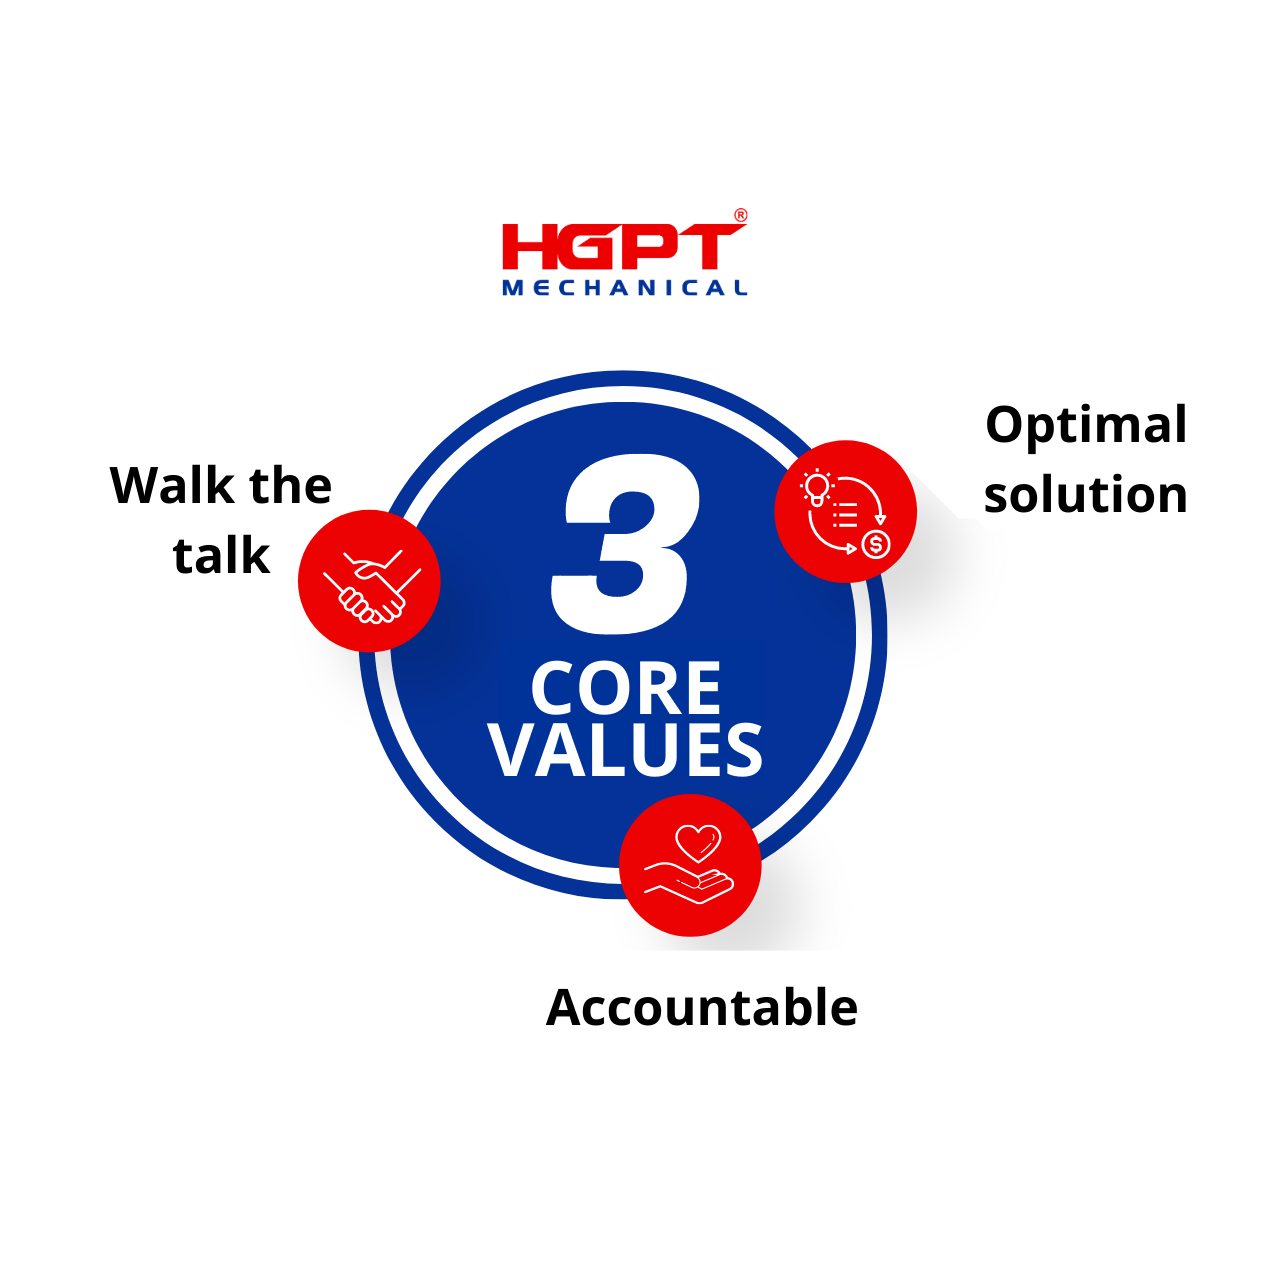 CORE VALUES OF HGPT MECHANICAL AND THE REPRESENTATIVE SET OF 3 CORE VALUES